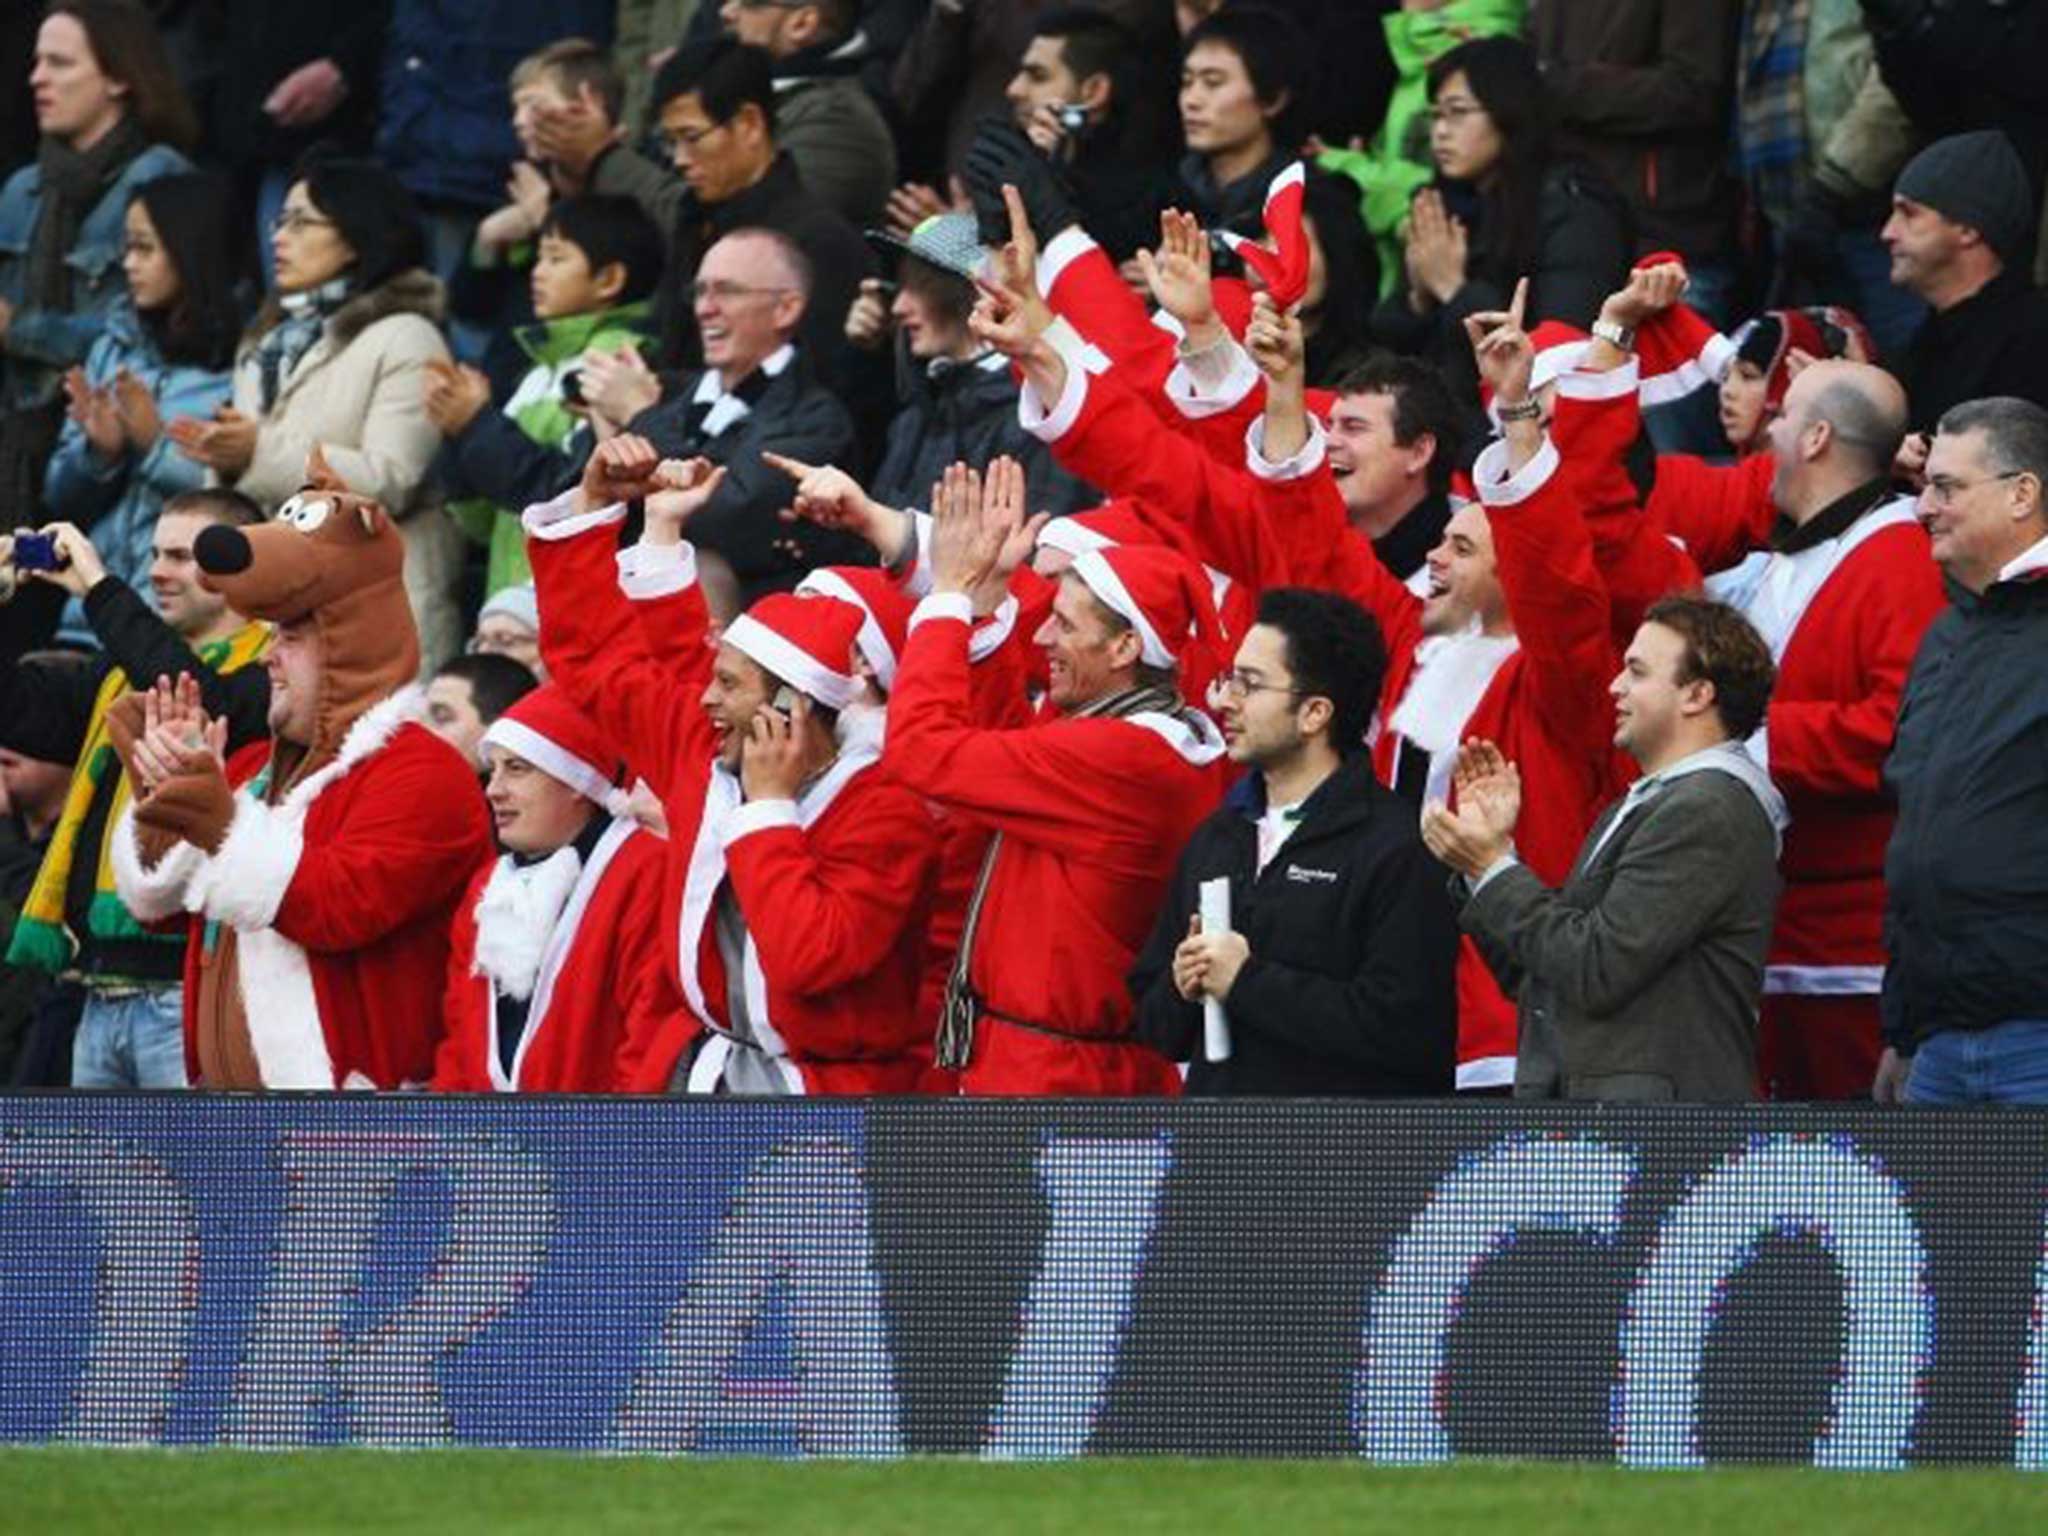 The sights of Christmas at a football match near you